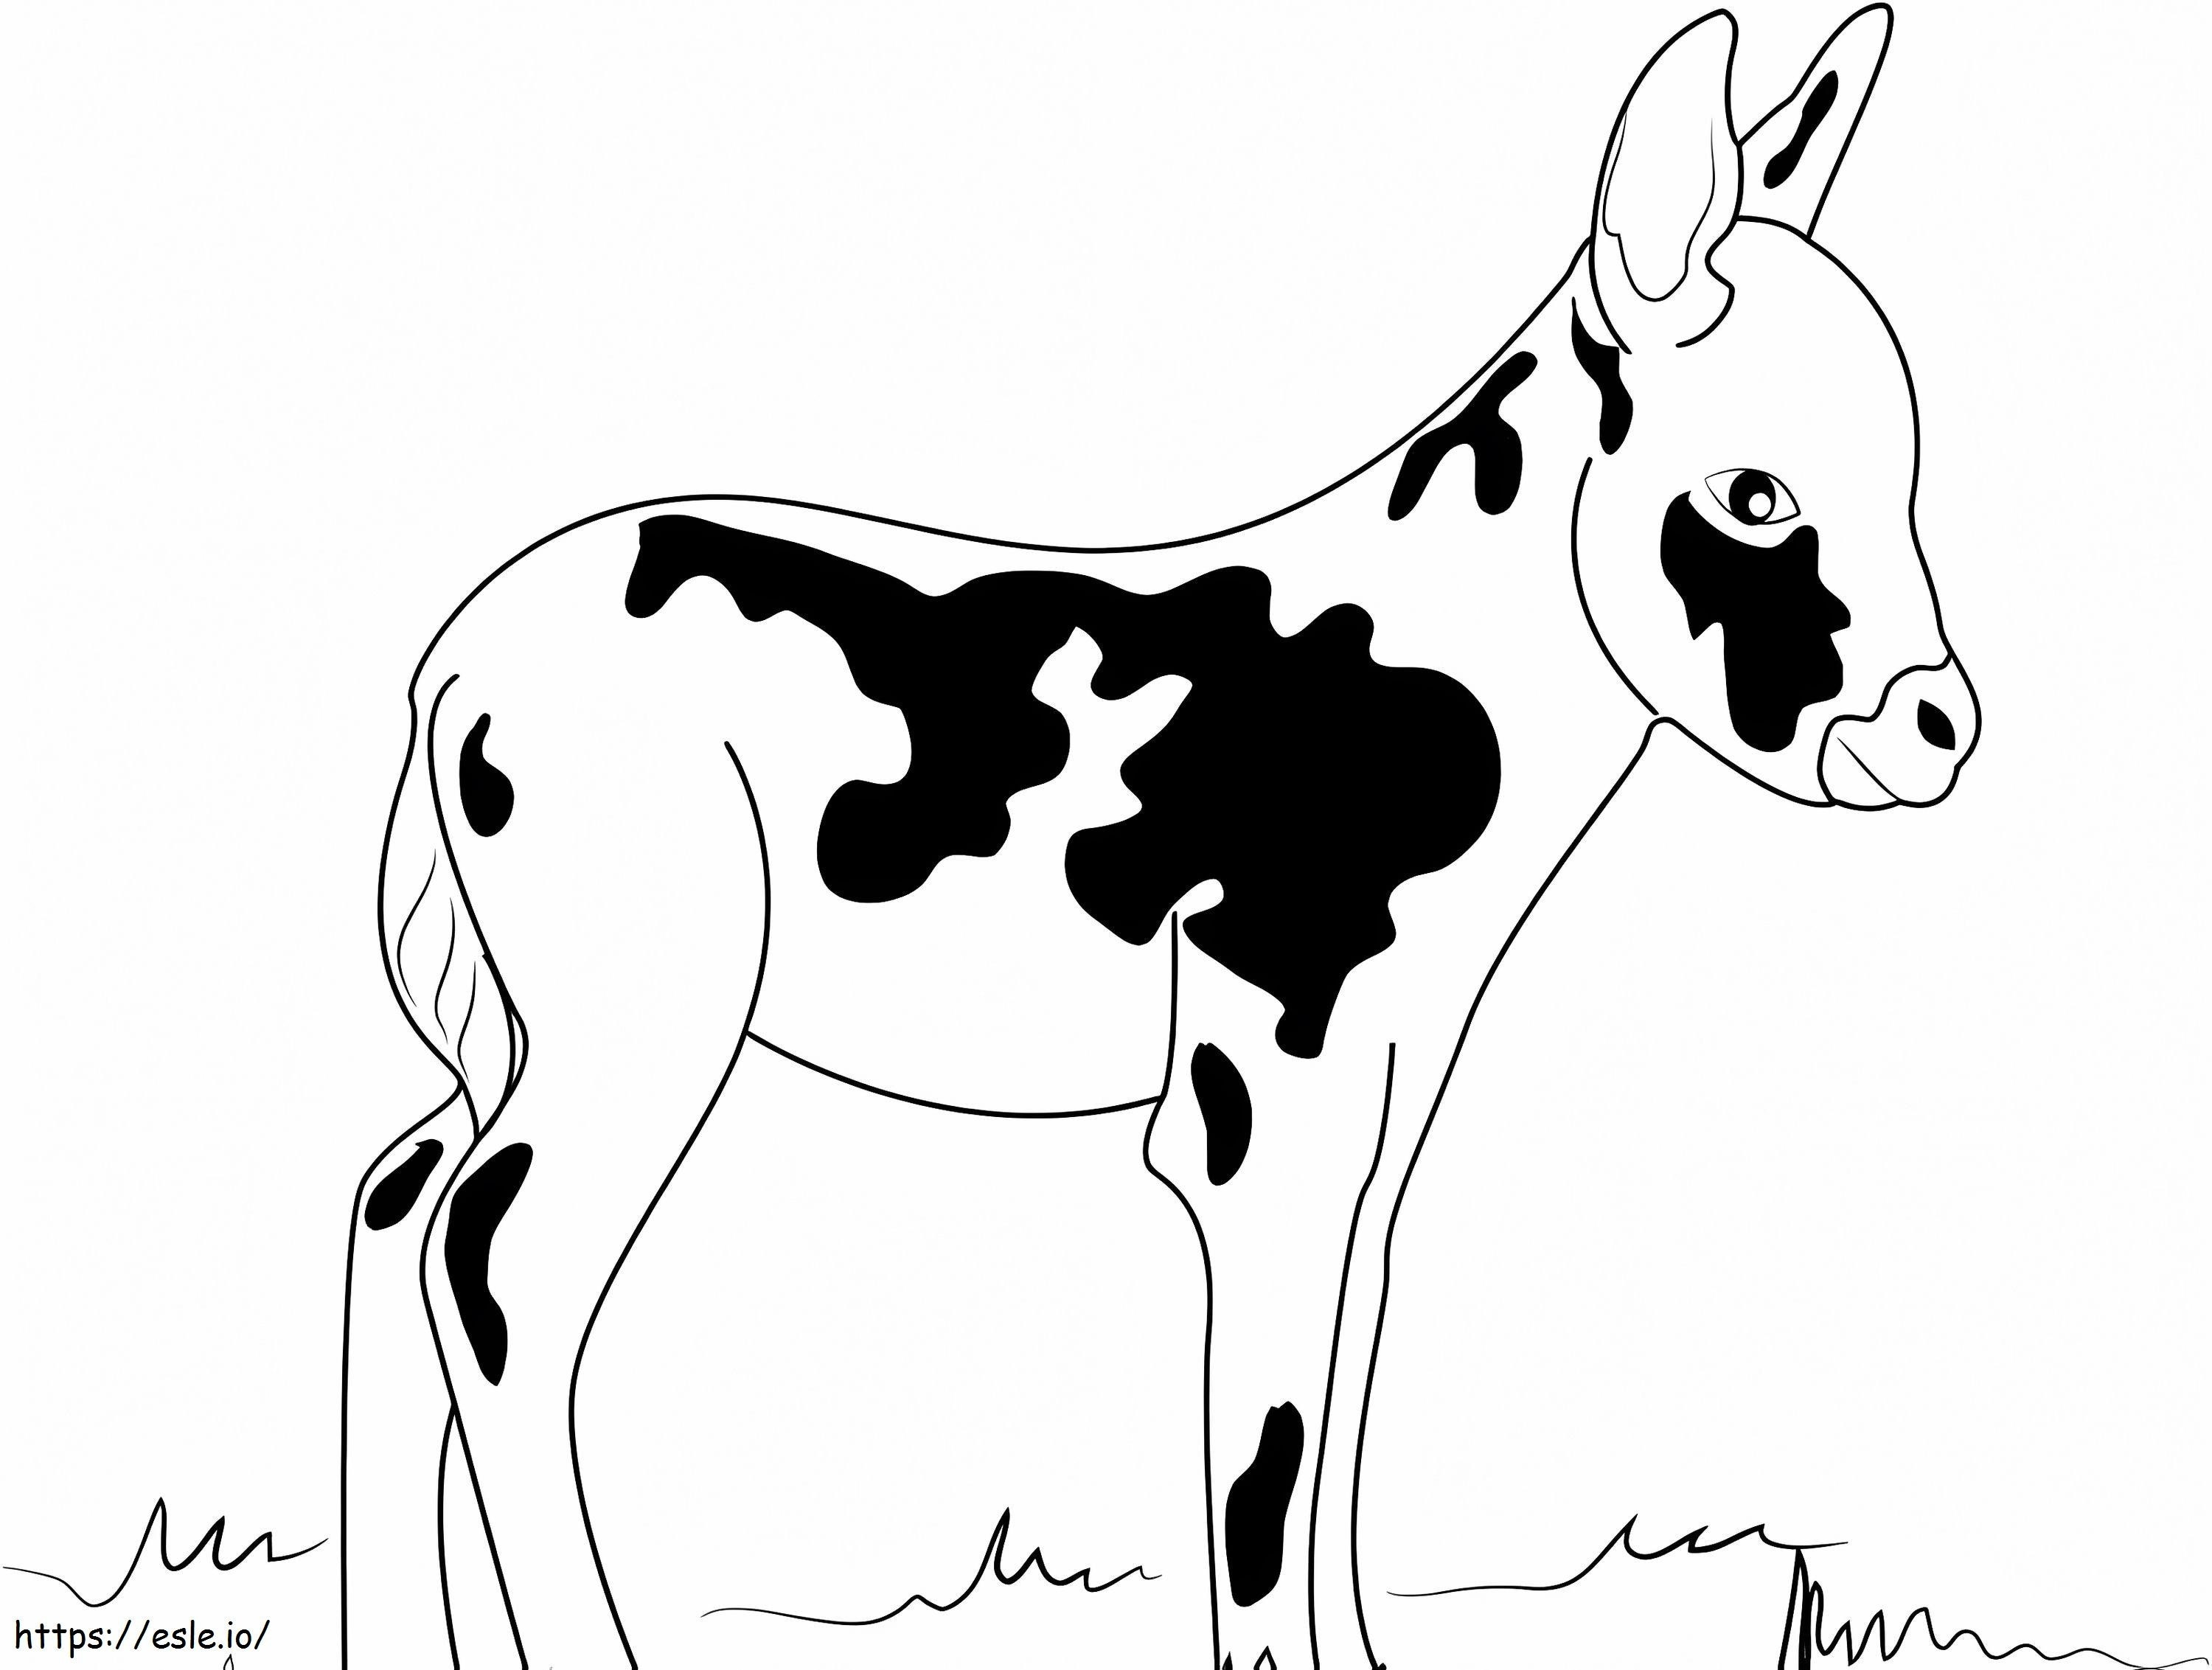 Miniature Donkey coloring page